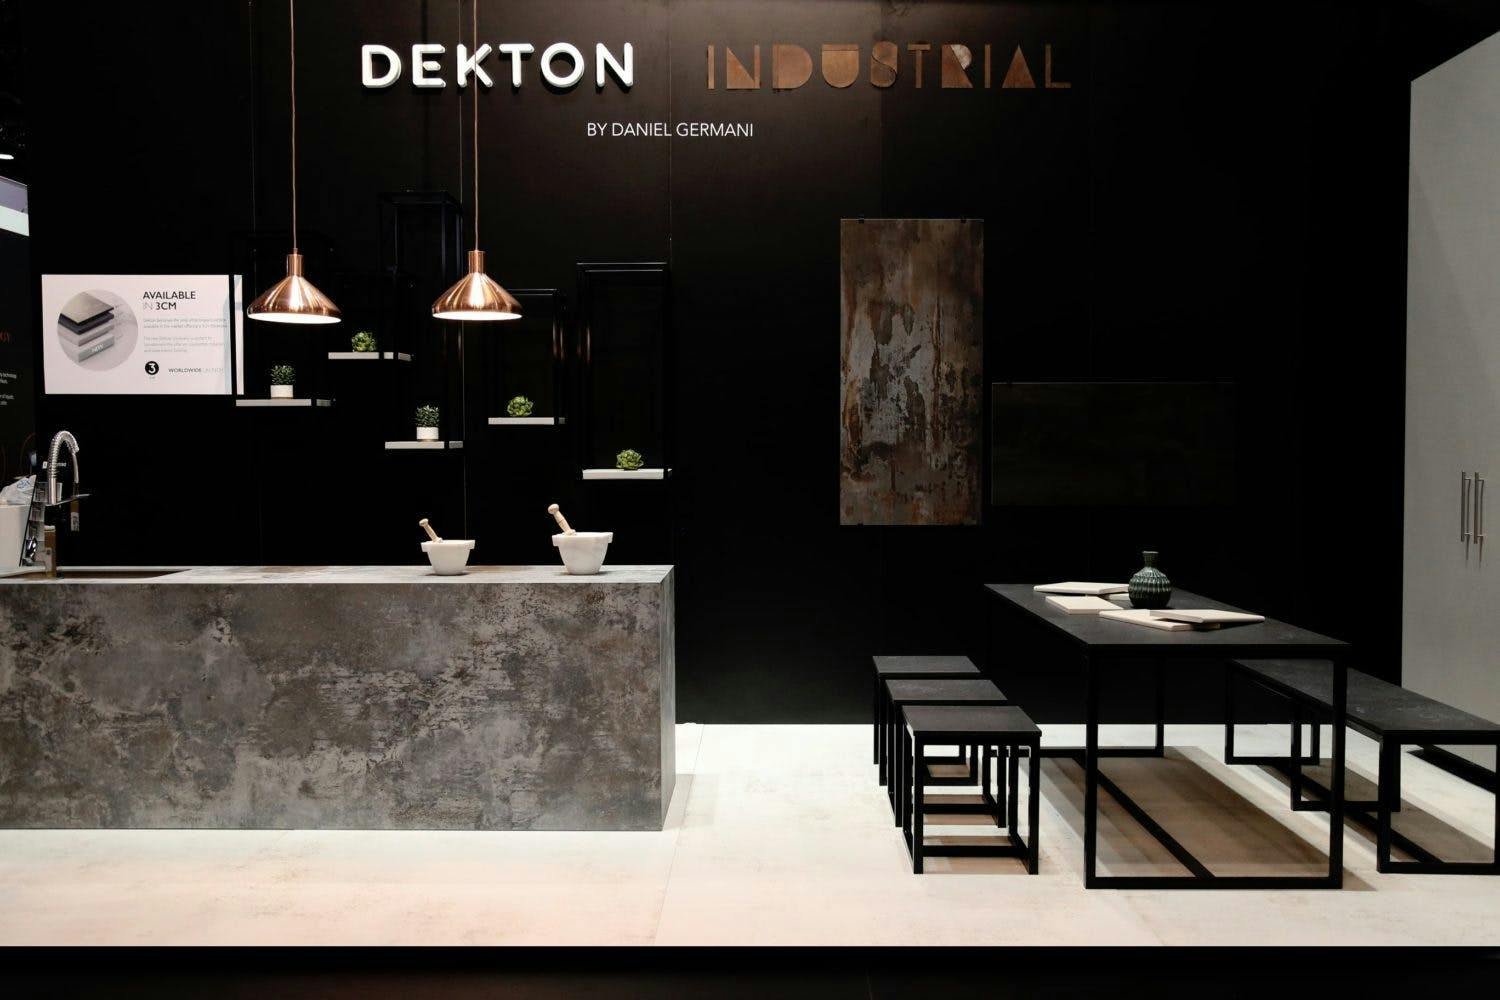 Image 32 of Dekton Industrial Stand Cosentino KBIS 2018 lr 1500x1000 5 in Cosentino presents its novelties at Swissbau and at IDS - Cosentino